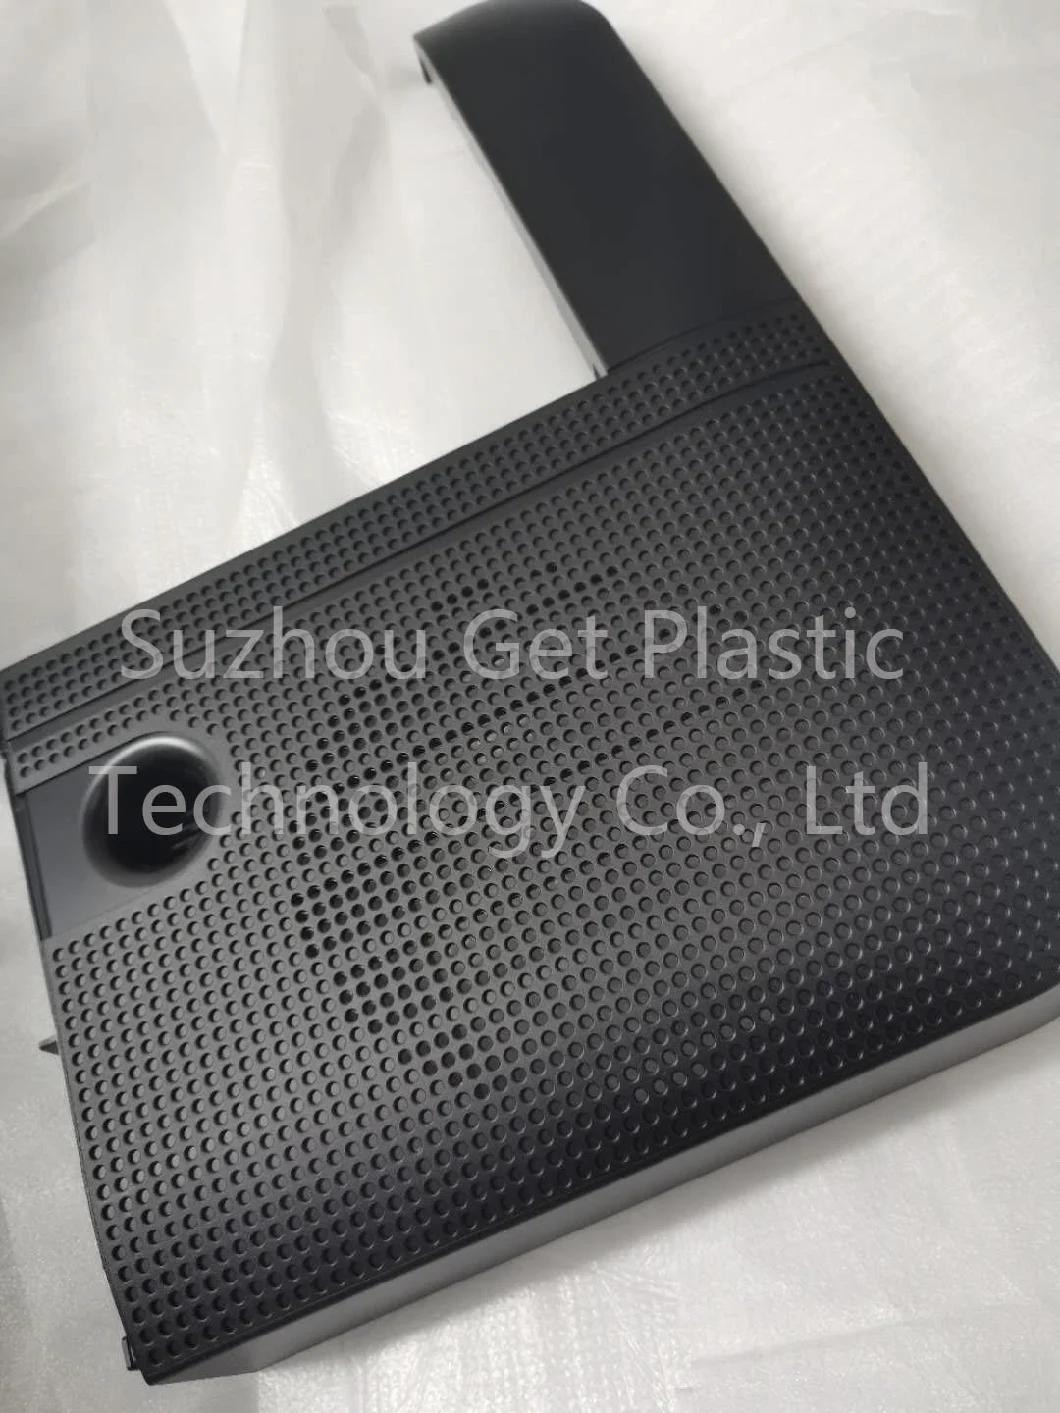 Good Quality Injection Molded Plastic Parts